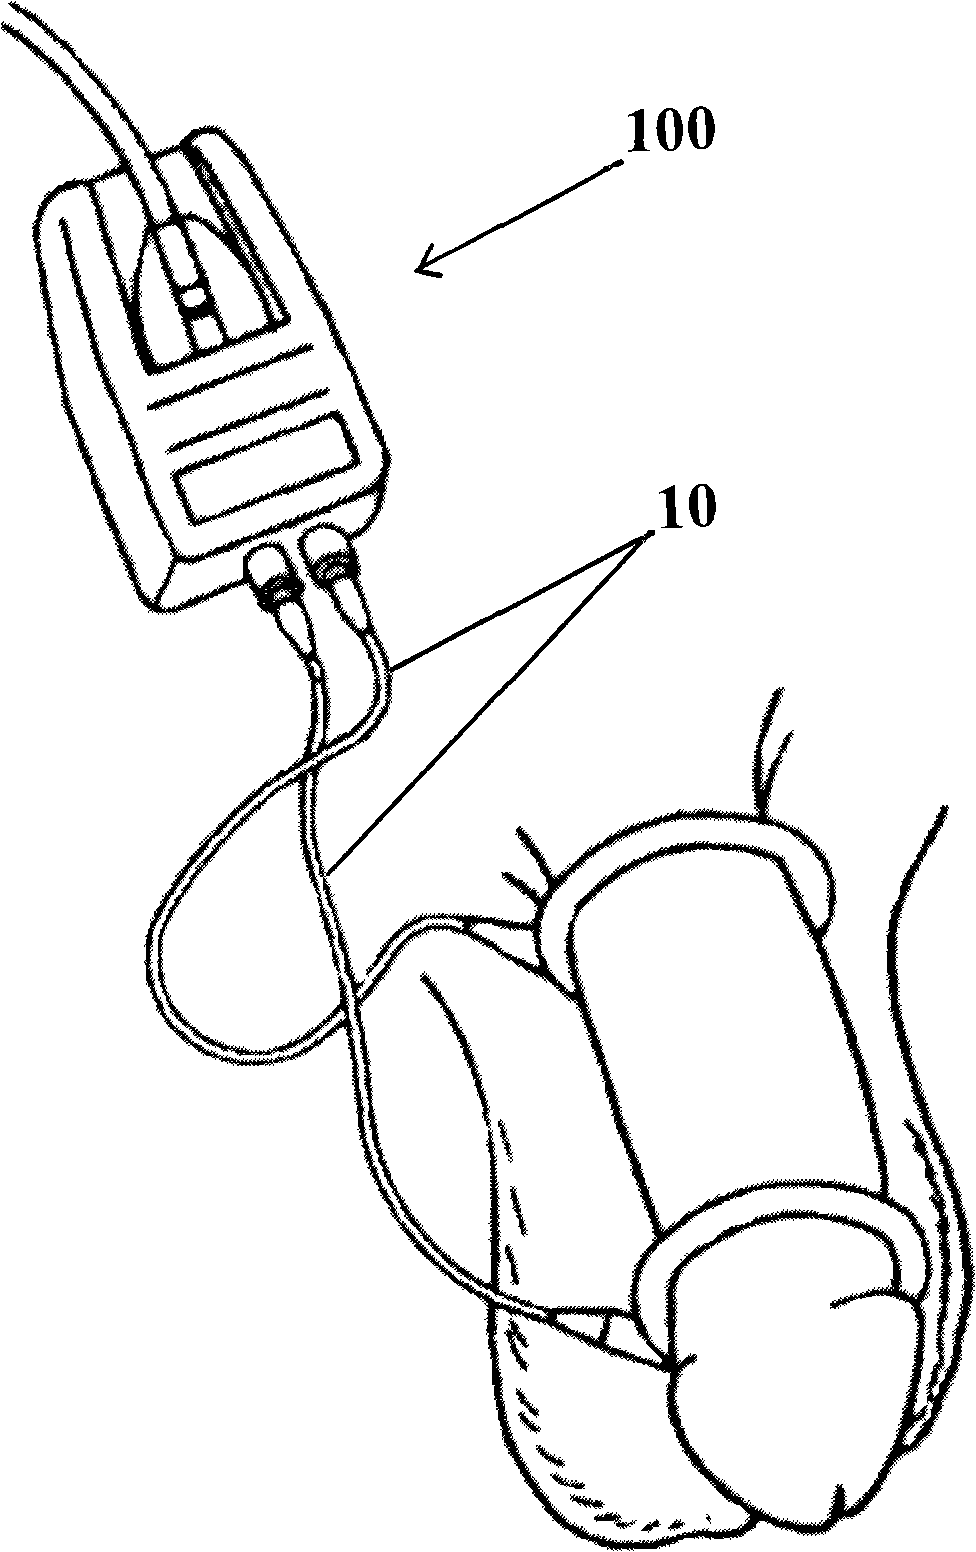 Peris erection detection sensing device and detection device